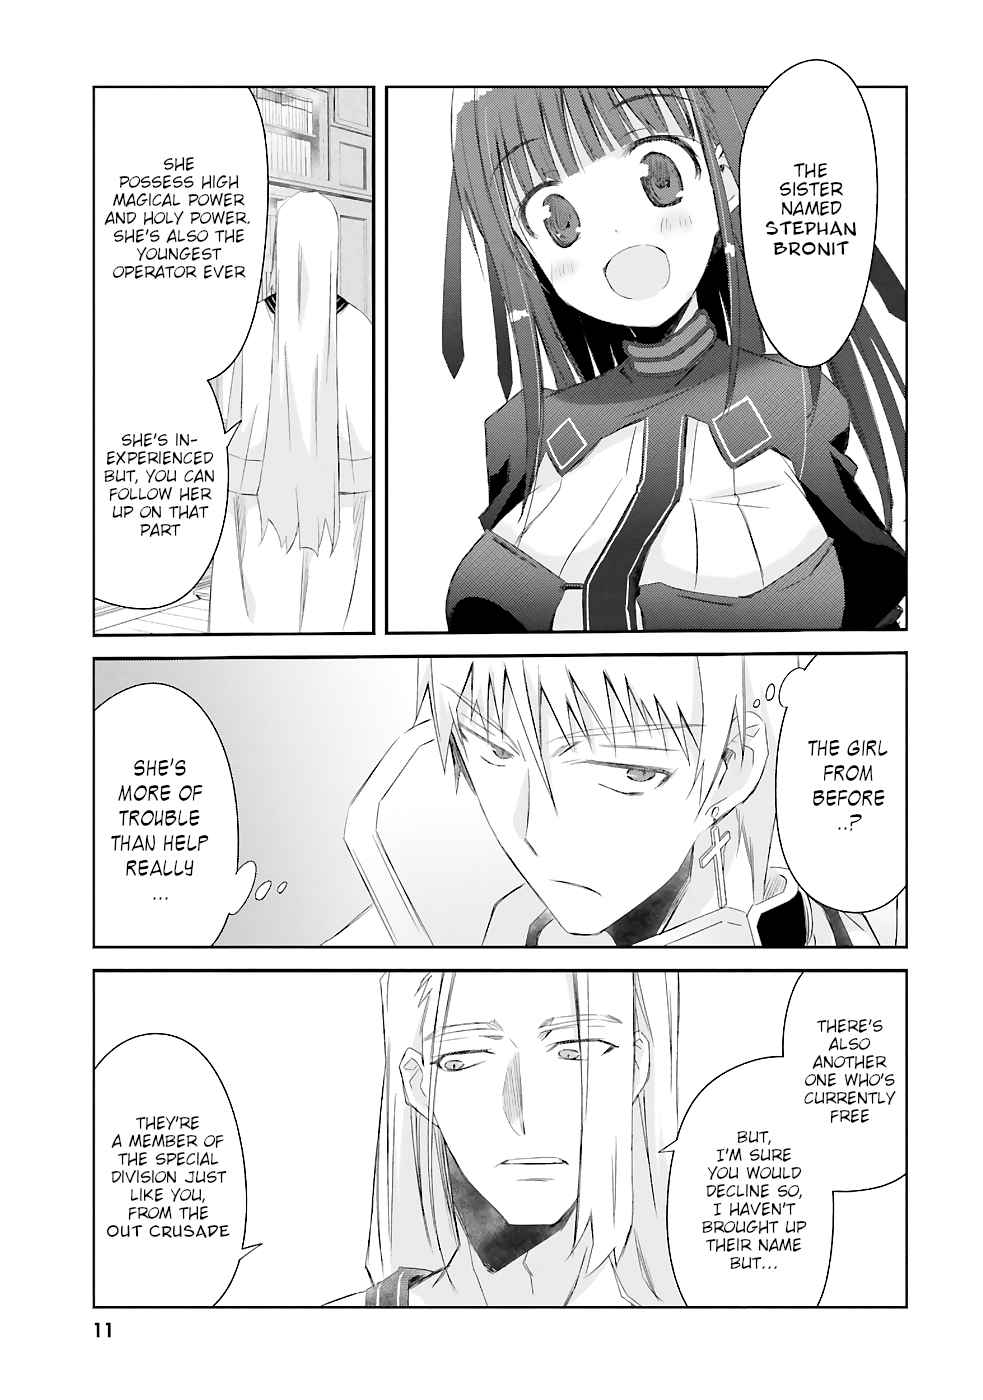 A Simple Task of Providing Support from the Shadows to Defeat the Demon Lord Vol. 2 Ch. 8